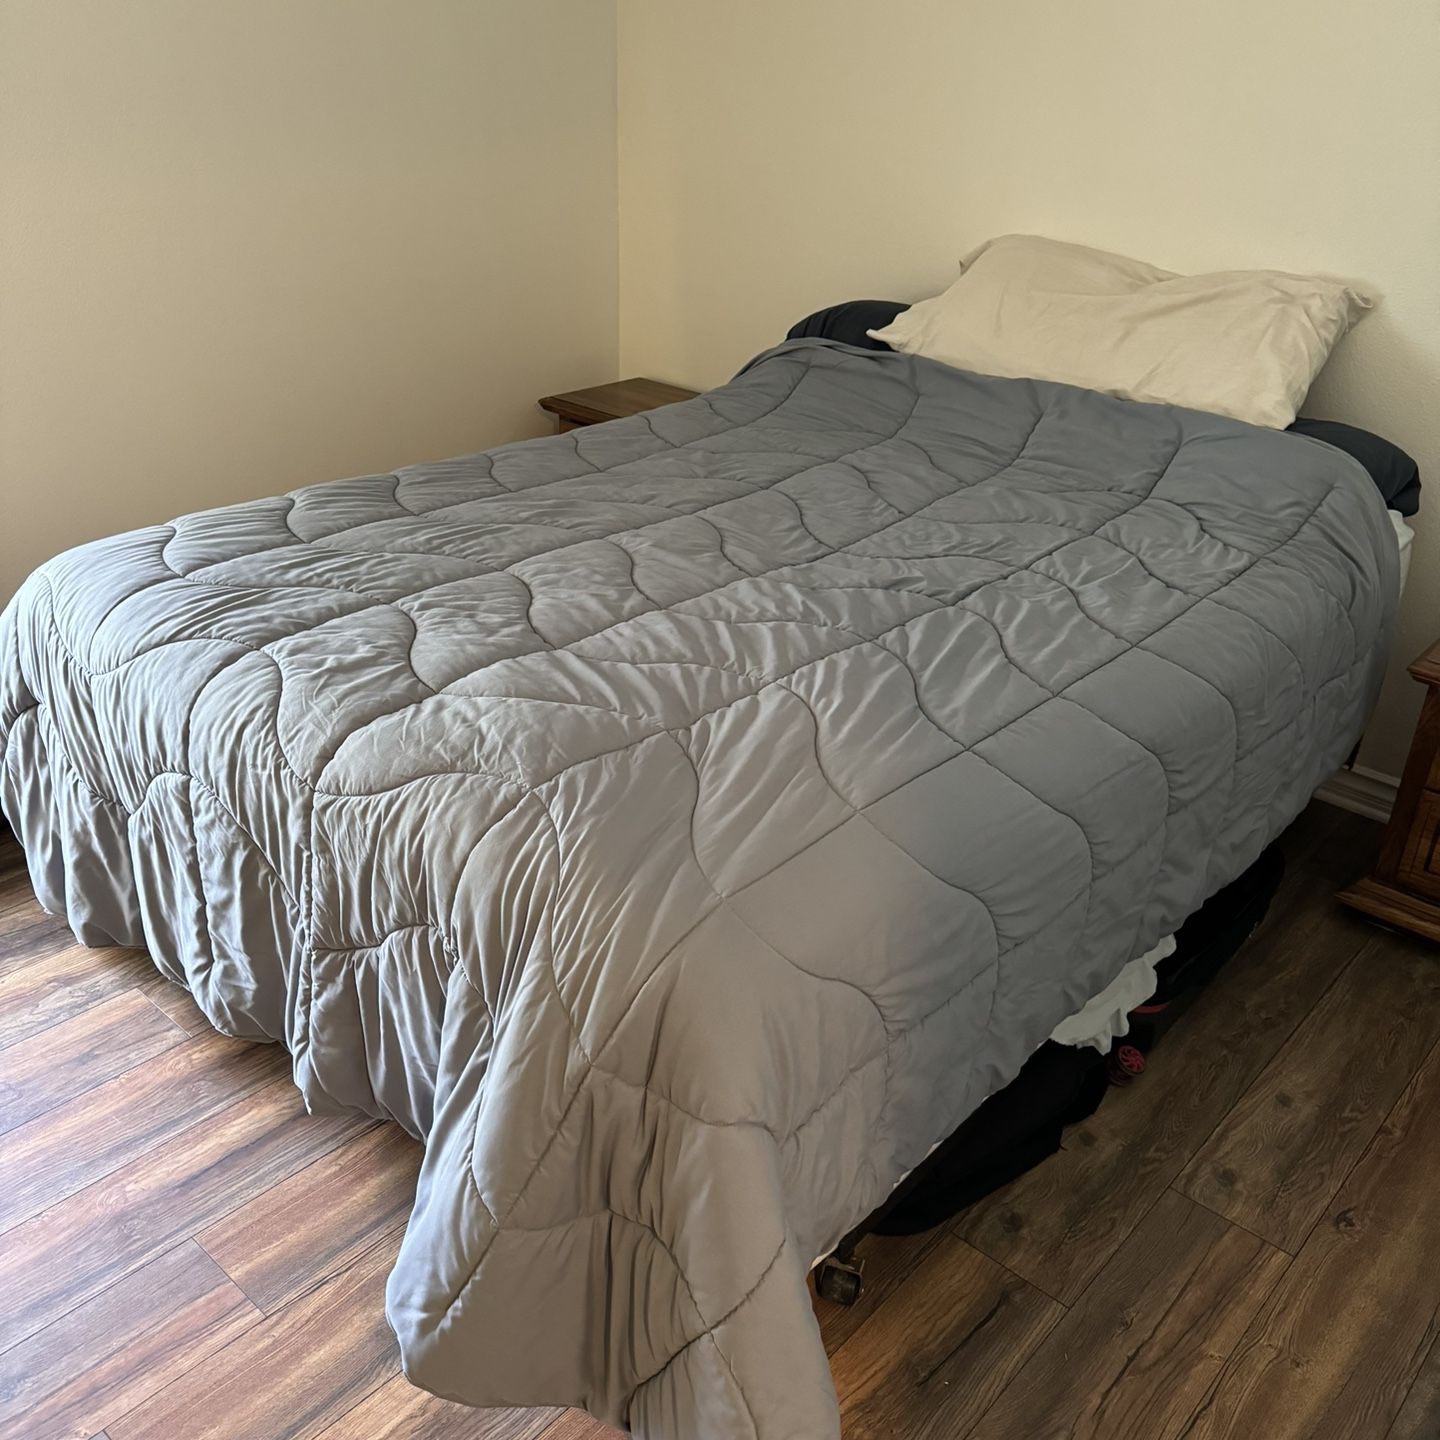 Queen mattress, Frame, And Box Spring Available For Pickup ASAP 